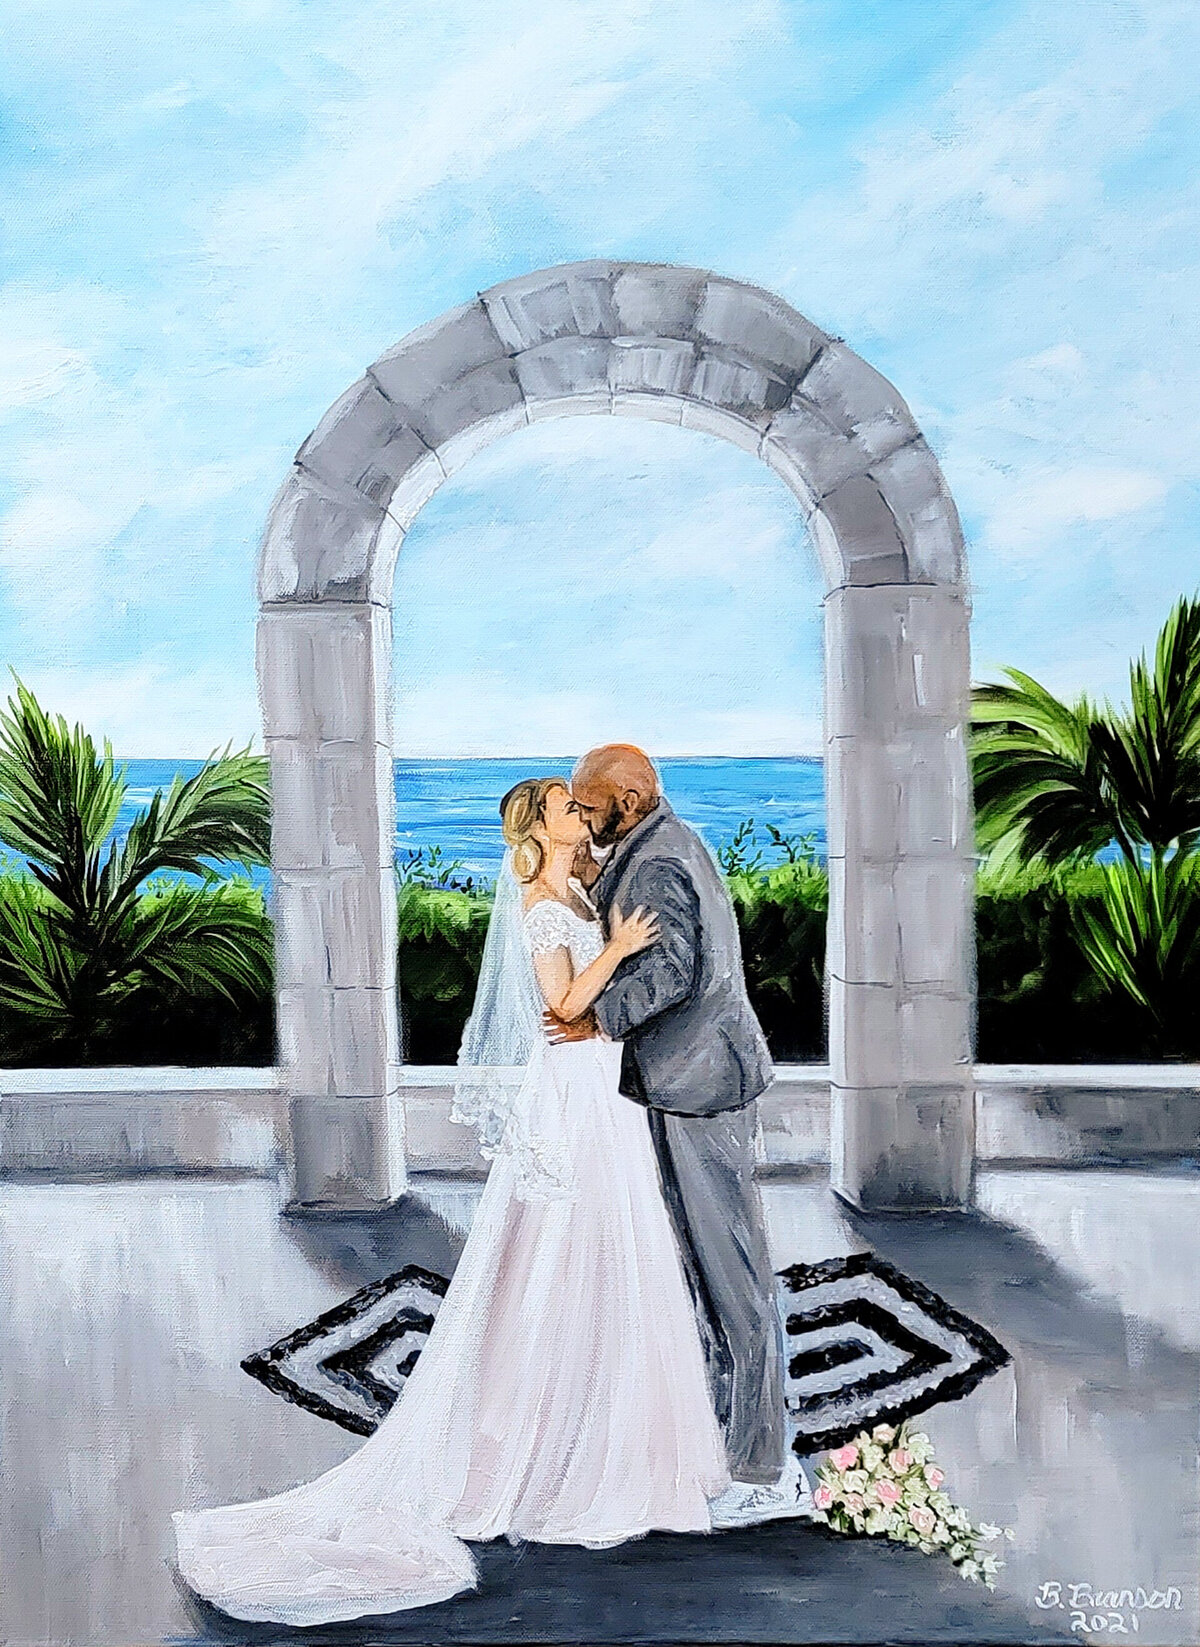 Live wedding painting of a bride and groom sharing their first kiss at a beachfront resort in Cancun, Mexico